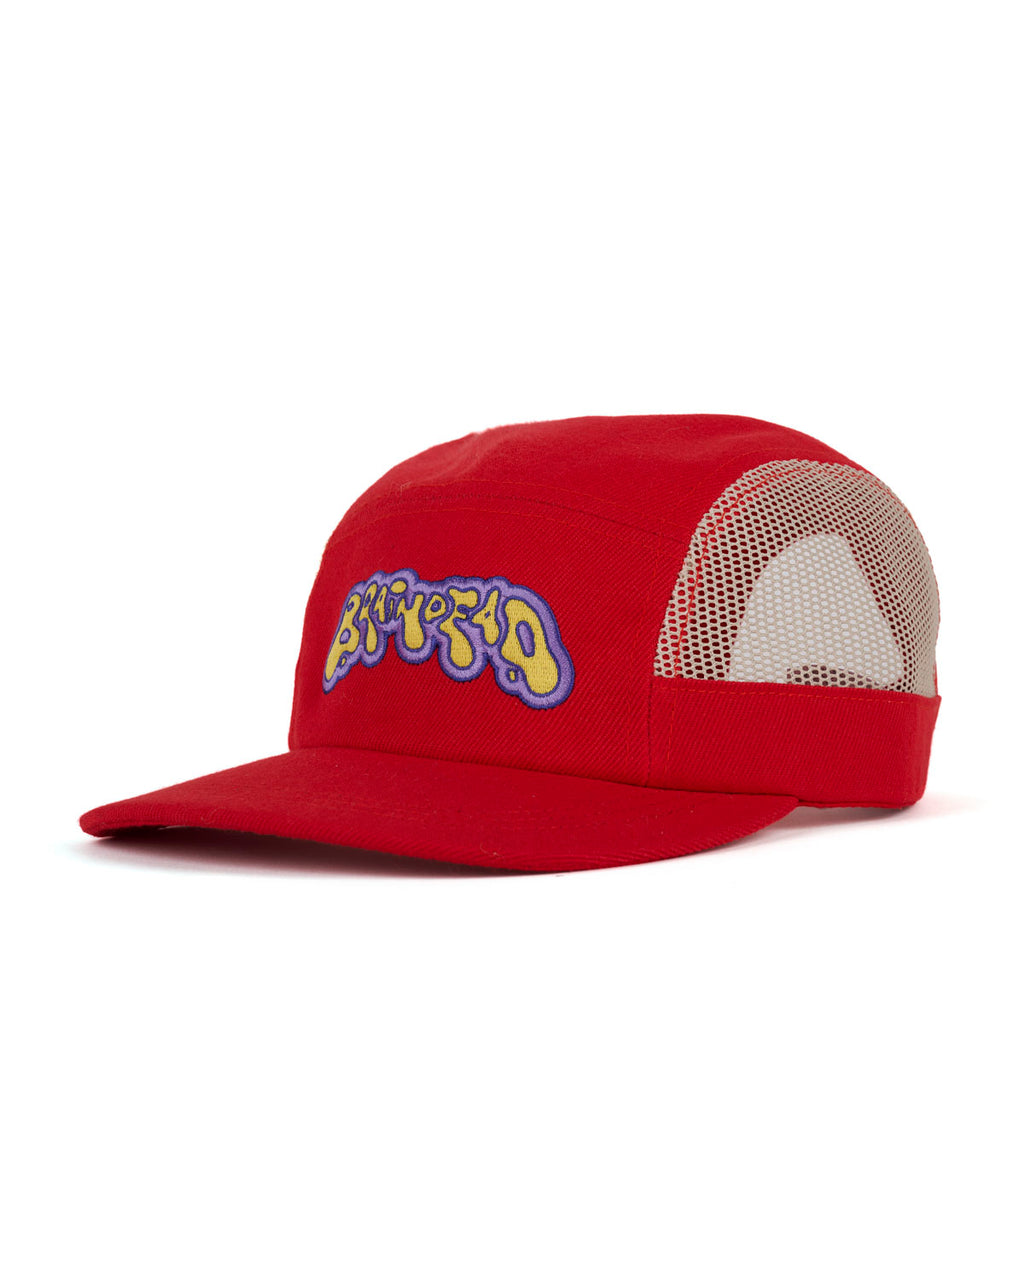 Mesh Panel Camp Hat, Red